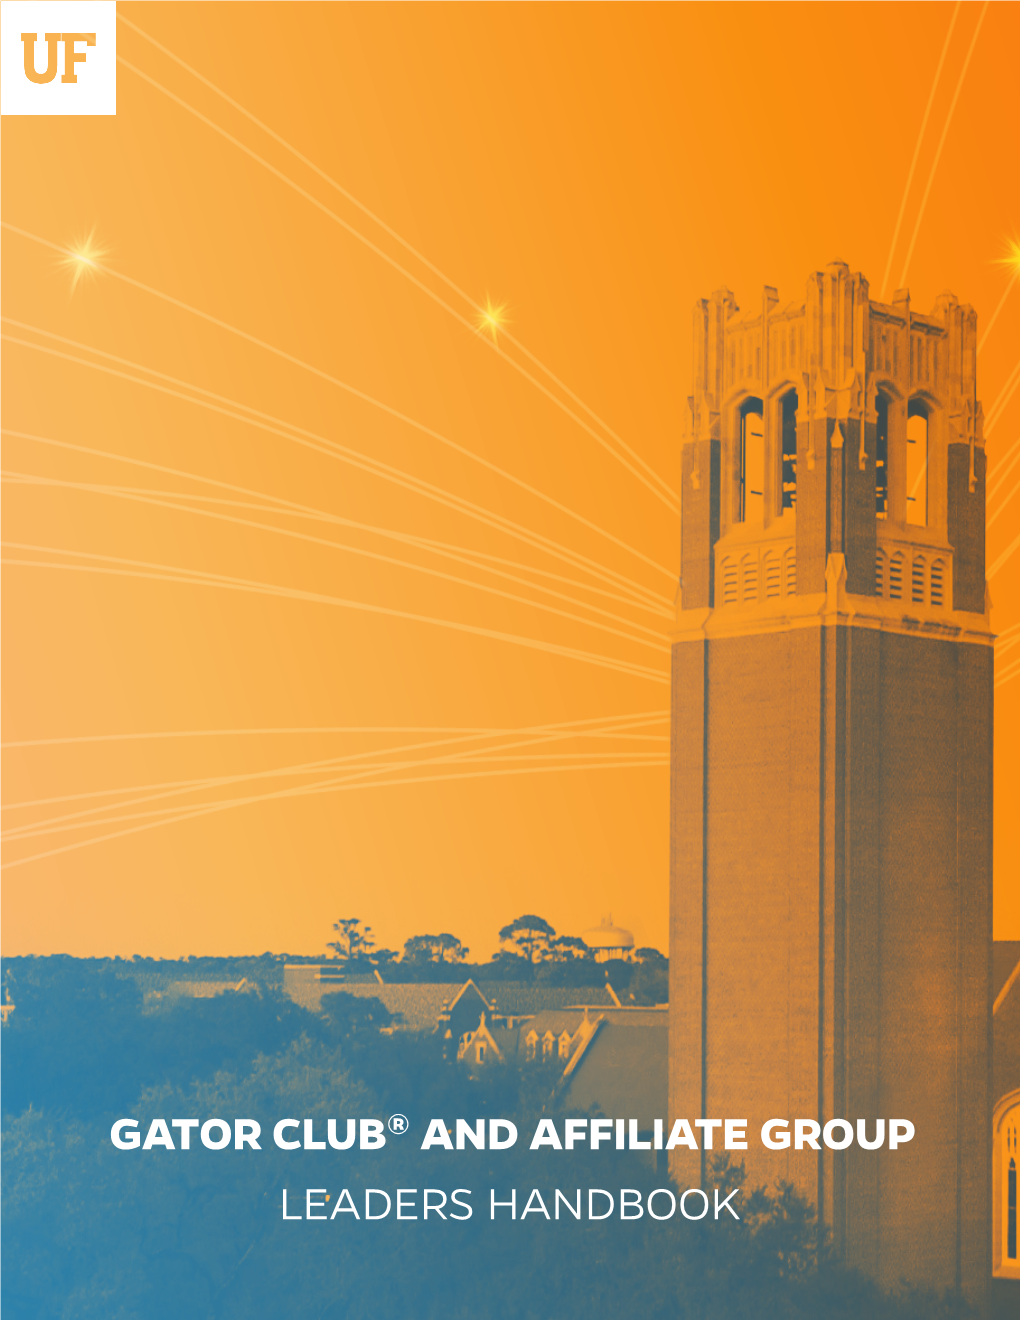 GATOR CLUB® and AFFILIATE GROUP LEADERS HANDBOOK Table of Contents